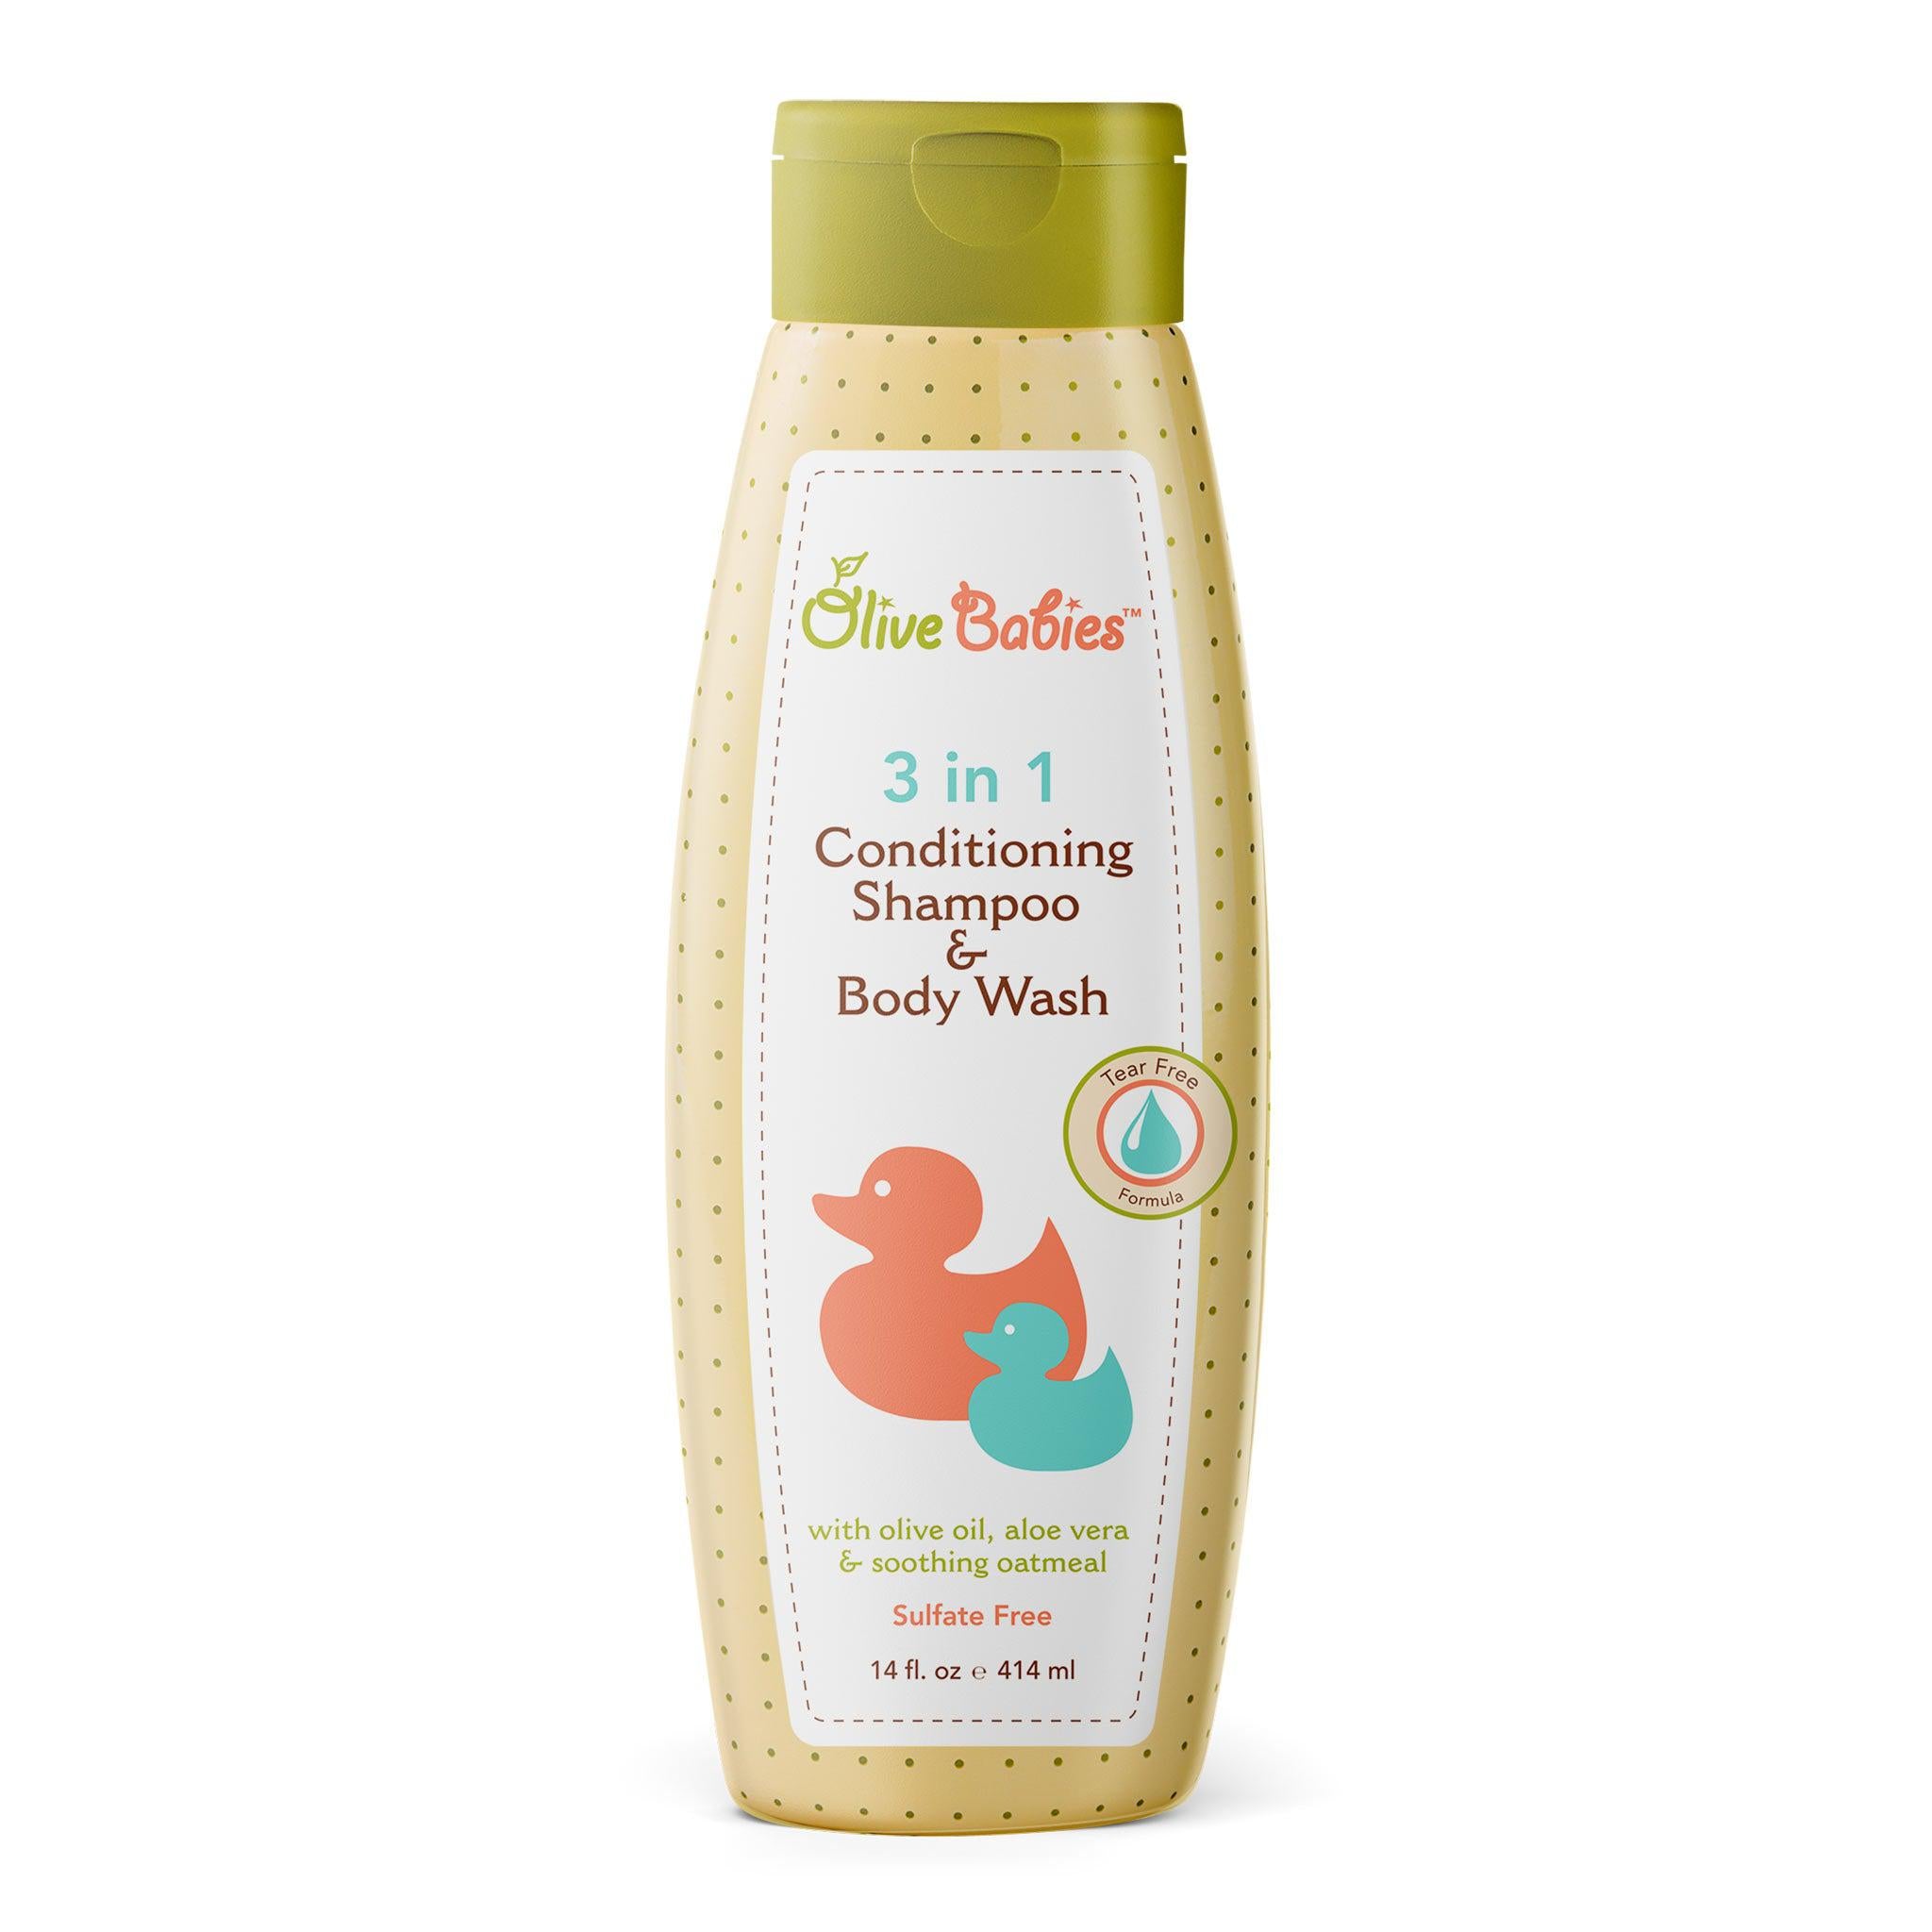 Olive Babies 3 in 1 Conditioning Shampoo & Body Wash - Afam Concept Inc.